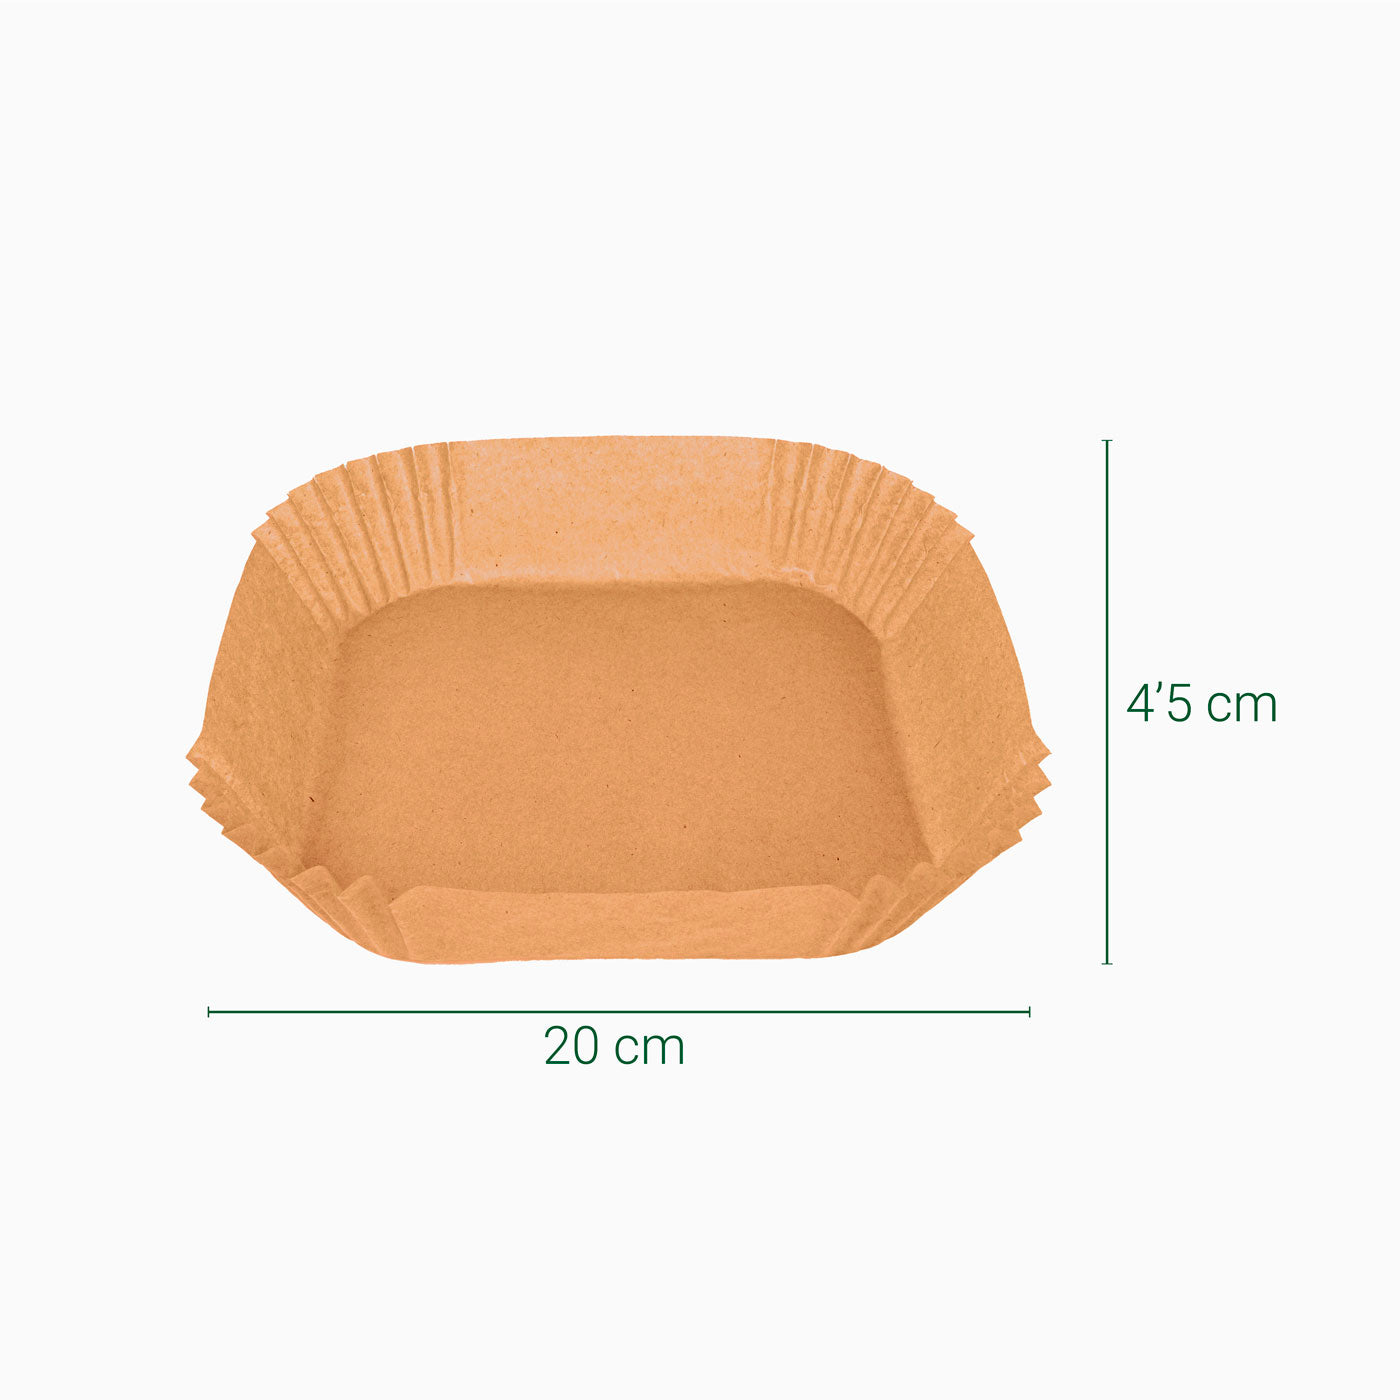 Siliconed paper mold square airfryer 20 x 20 x 4.5 cm